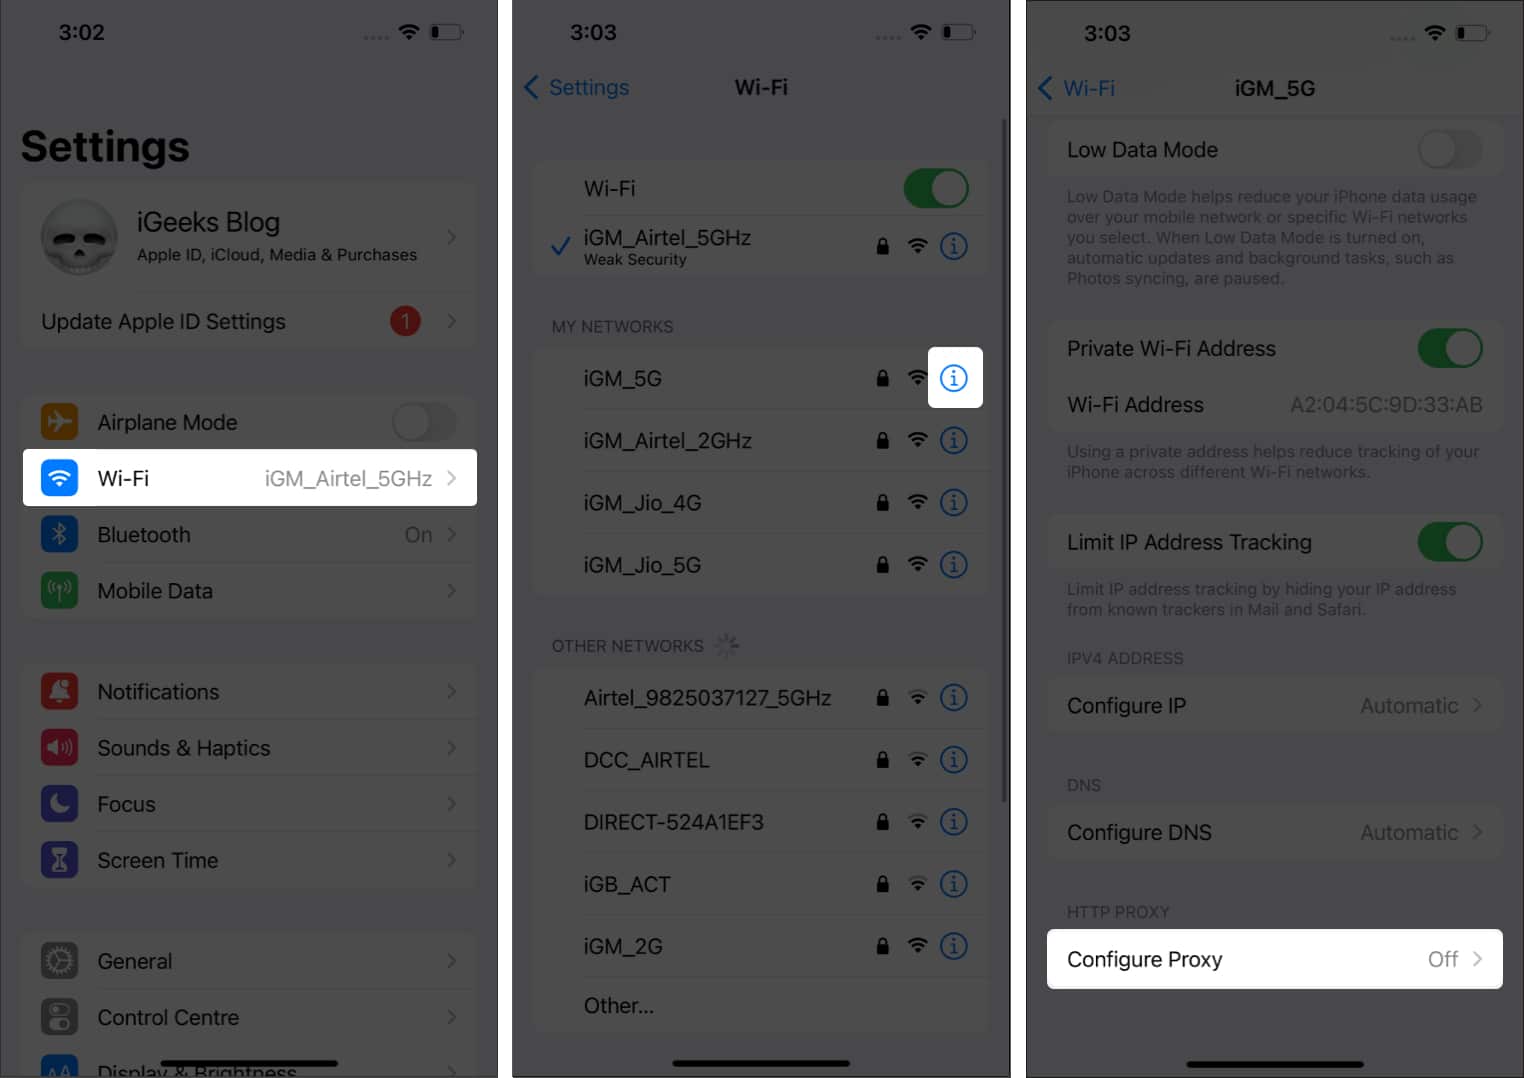 Tap Configure Proxy from WiFi settings on iPhone